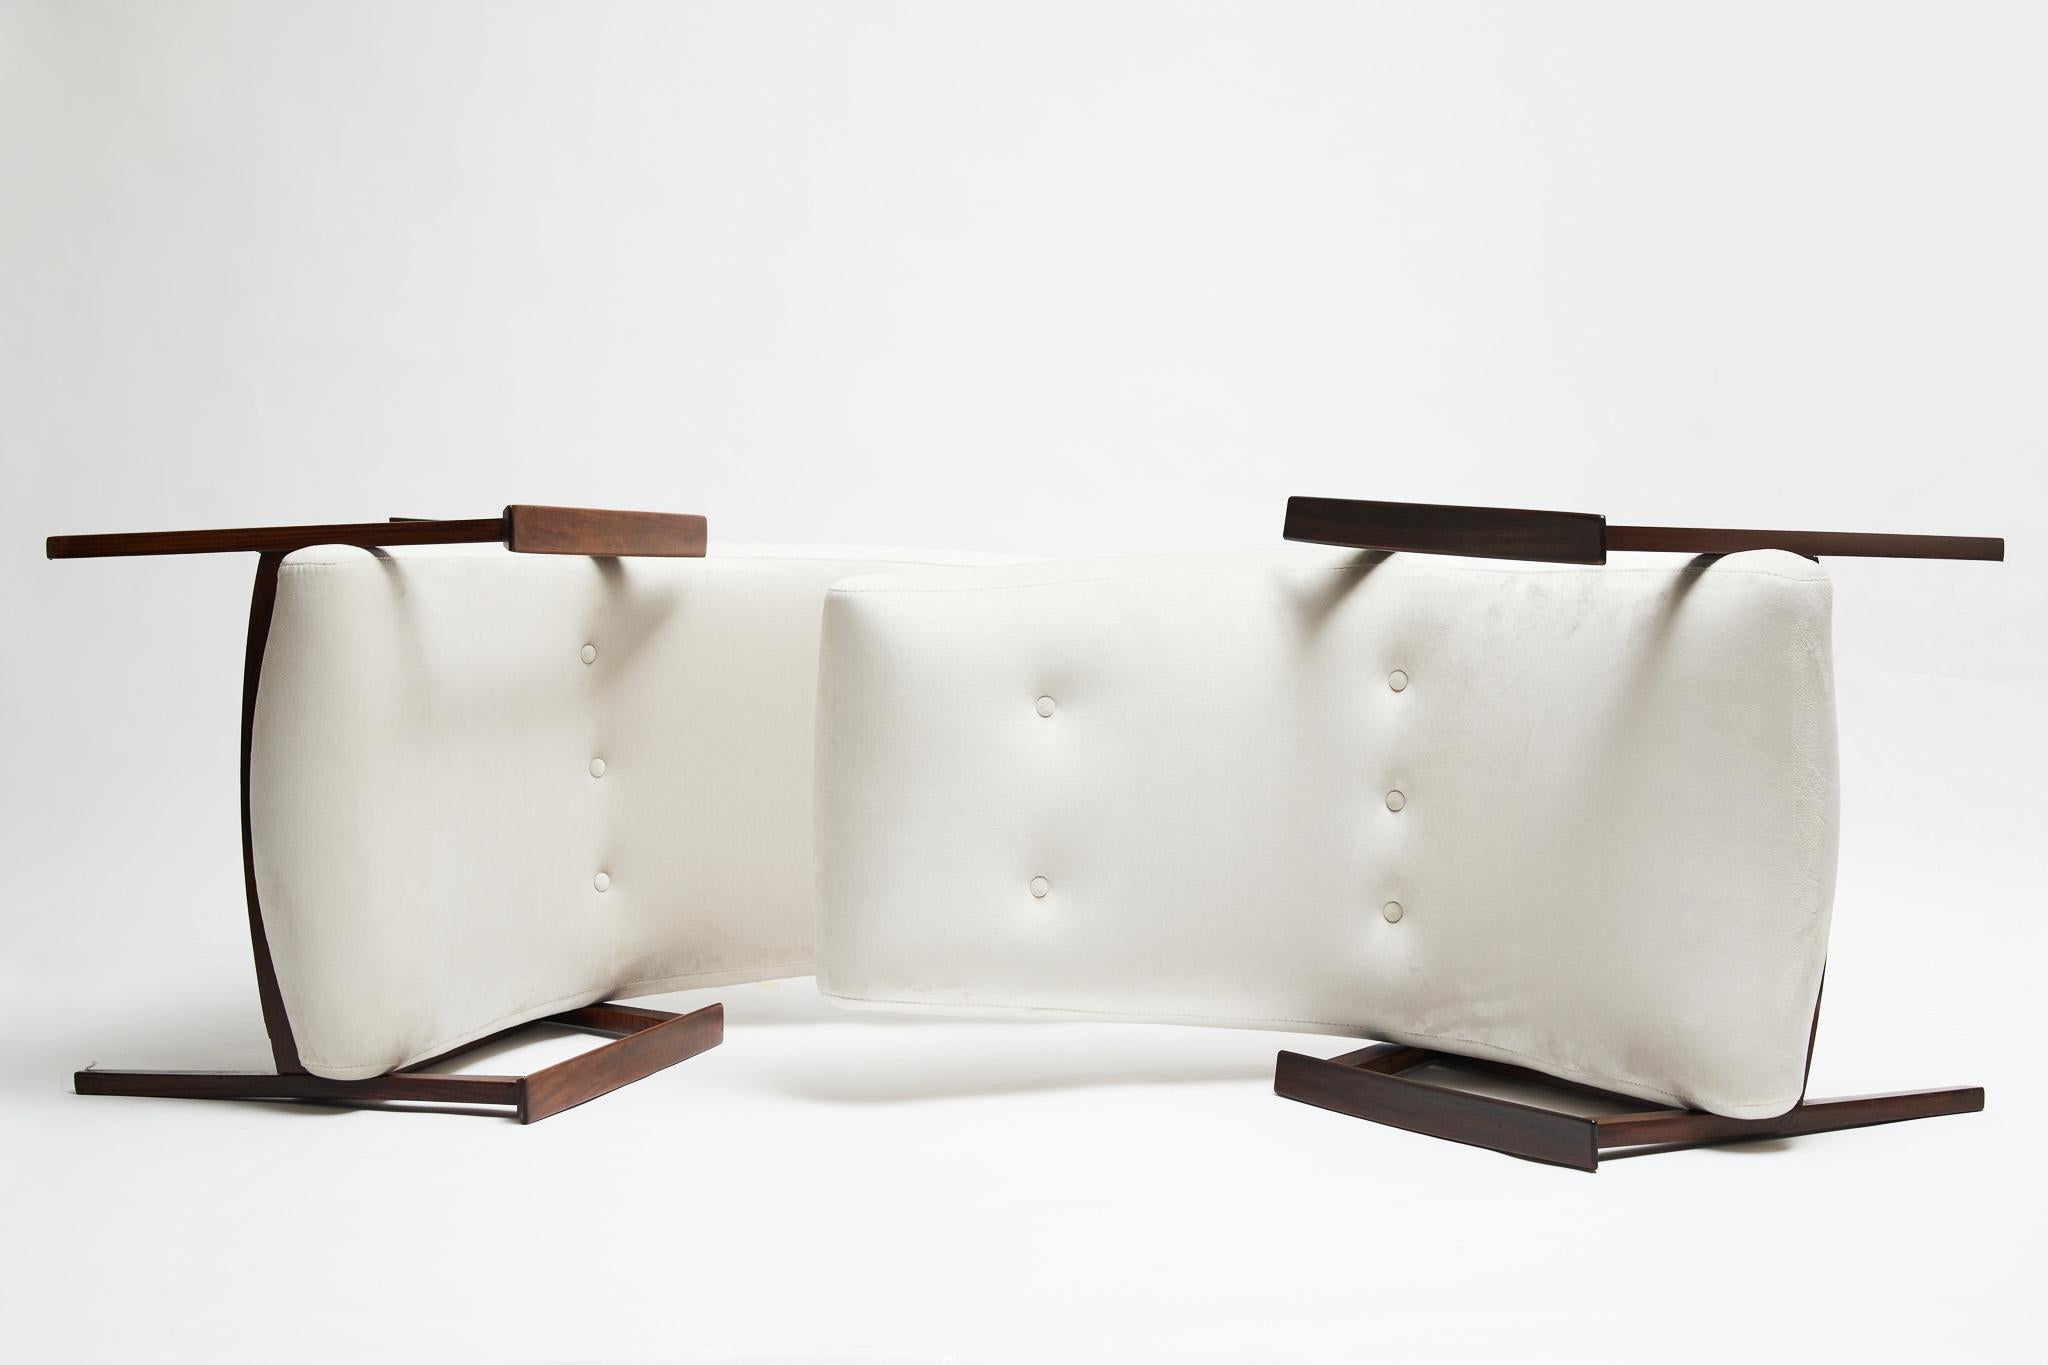 20th Century Mid-Century Modern Armchairs in Hardwood & White Suede by Gelli, ci 1960, Brazil For Sale